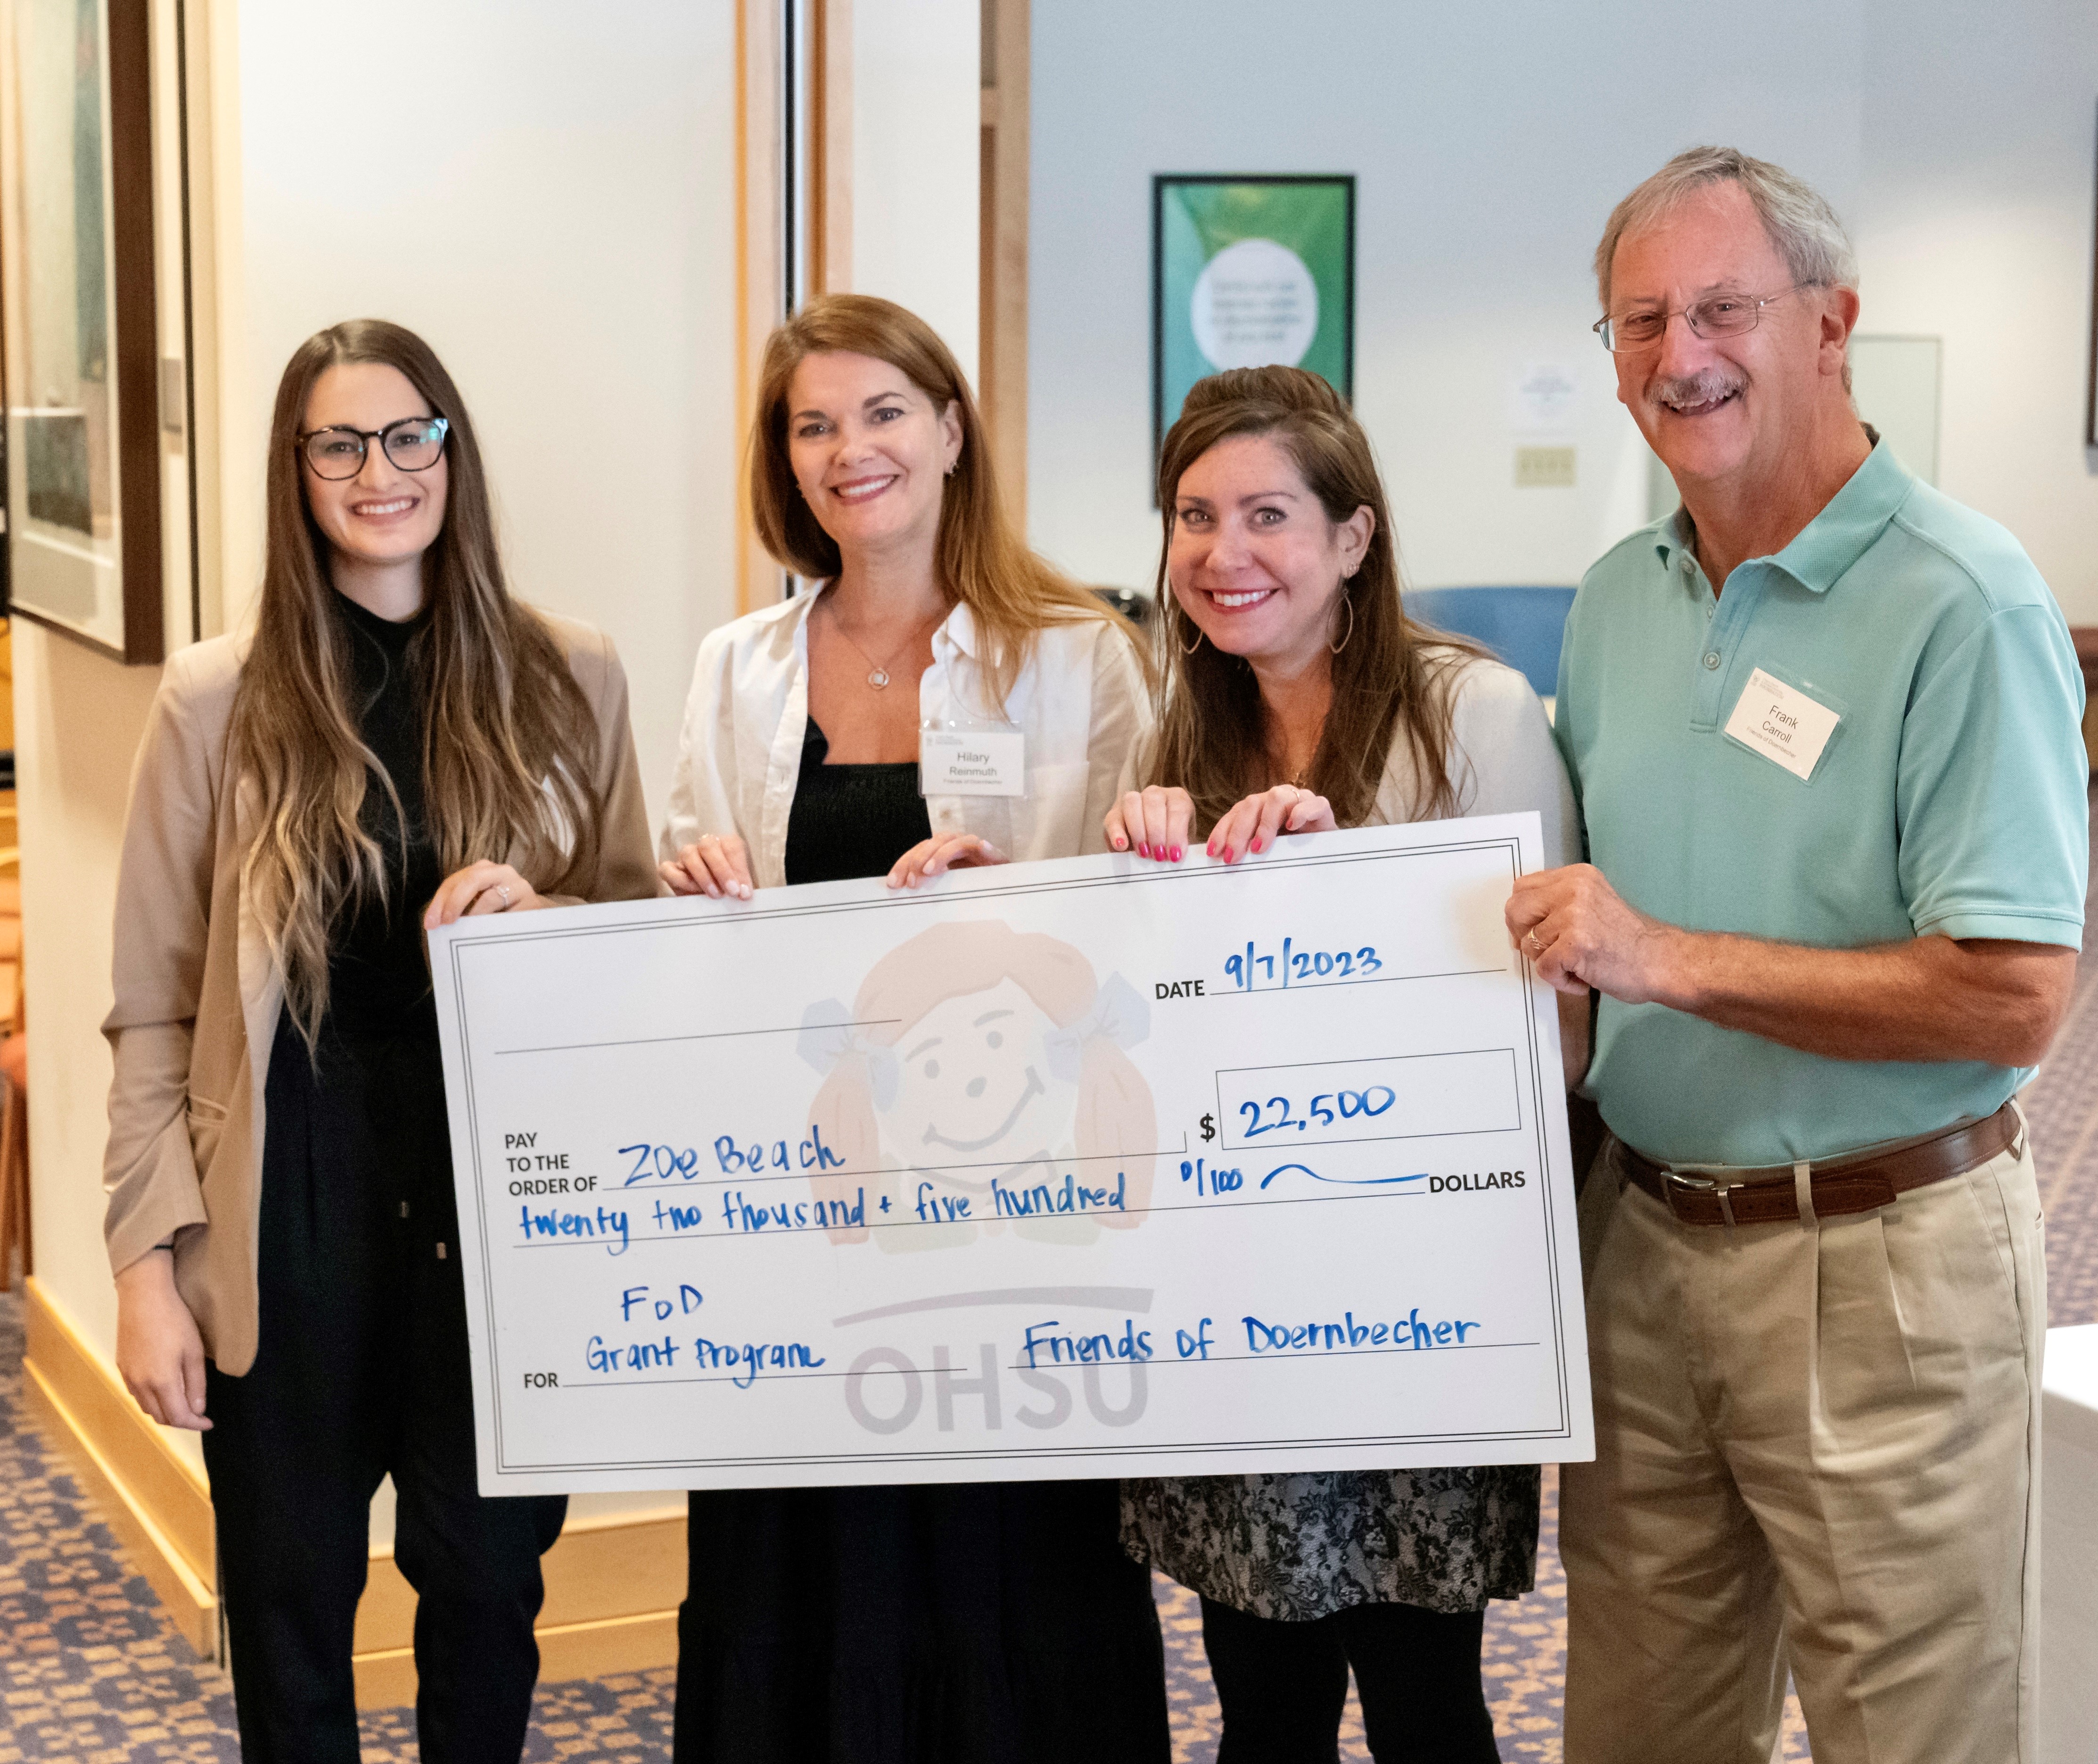 Zoe Beach (far left) is an MD/PhD student being awarded grant funding ffrom the Friends of Doernbecher for her project, “Evaluating Efficacy of Targeted Therapies in PDGFRA Altered Pediatric Brain Tumors".